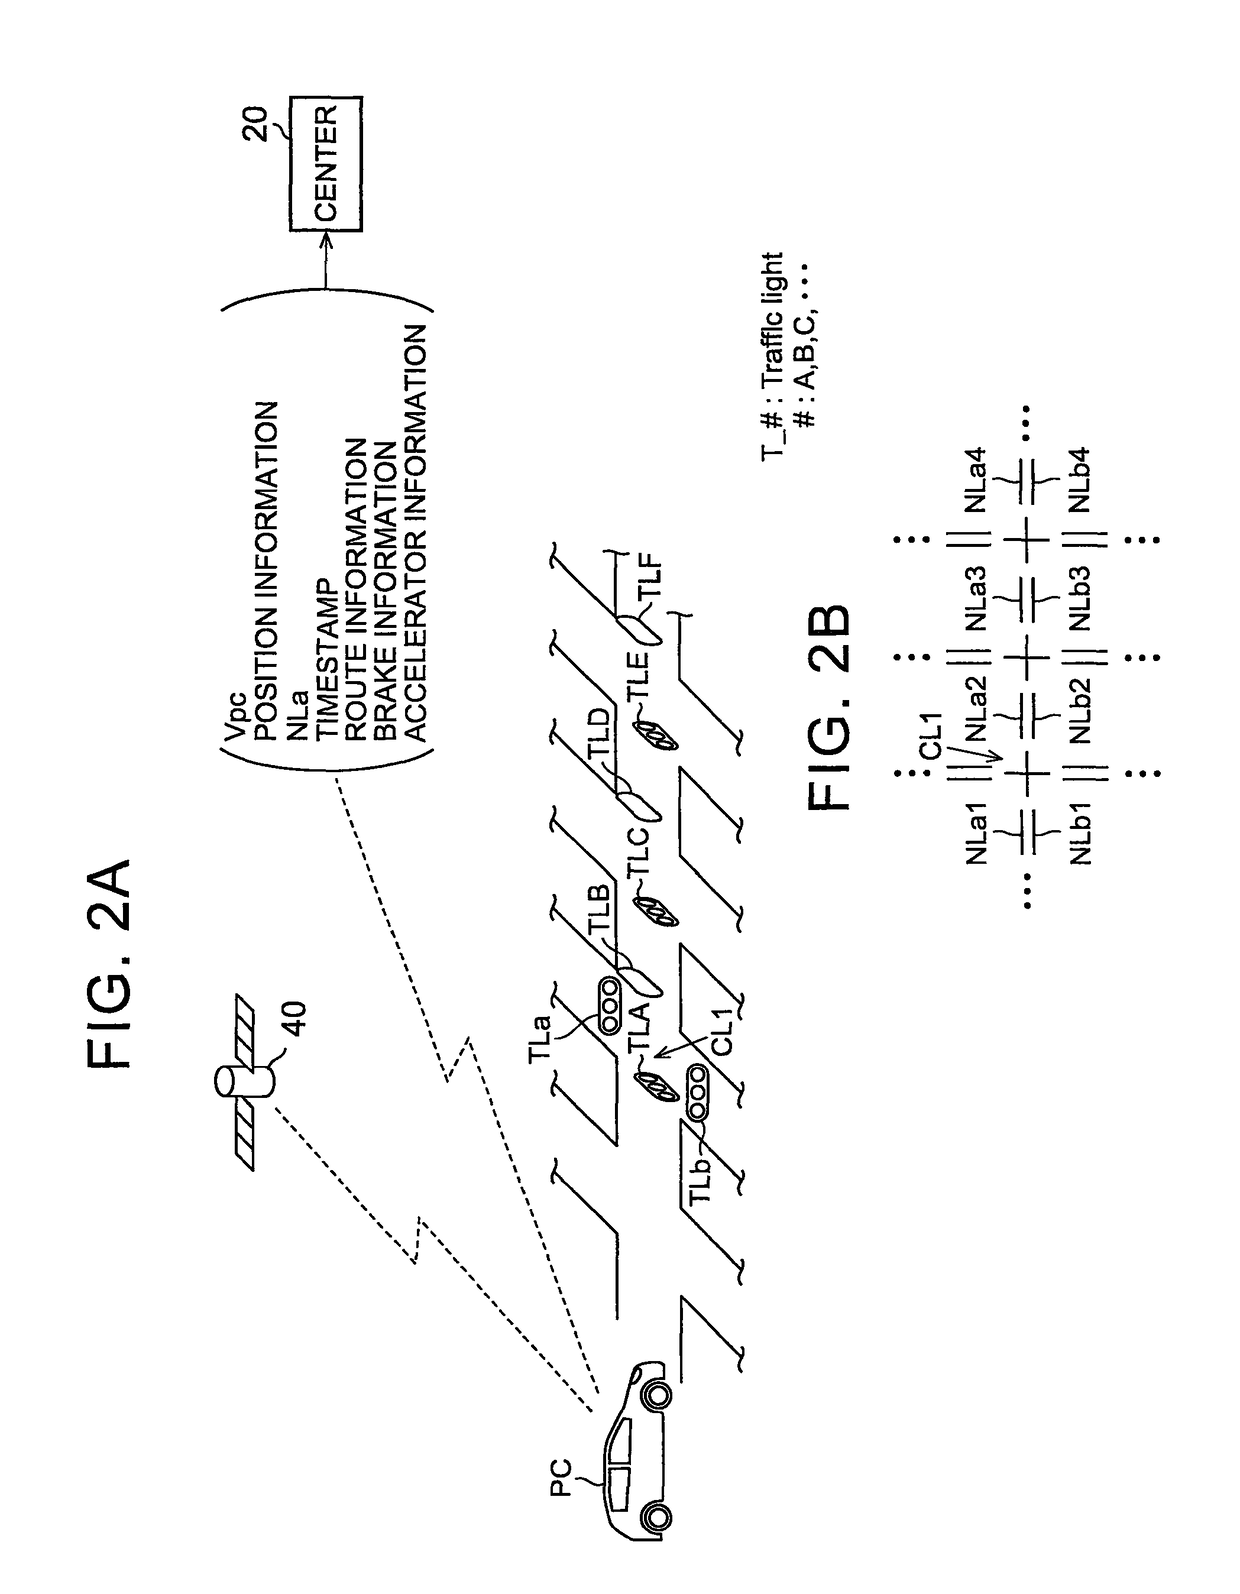 Traffic-light cycle length estimation device